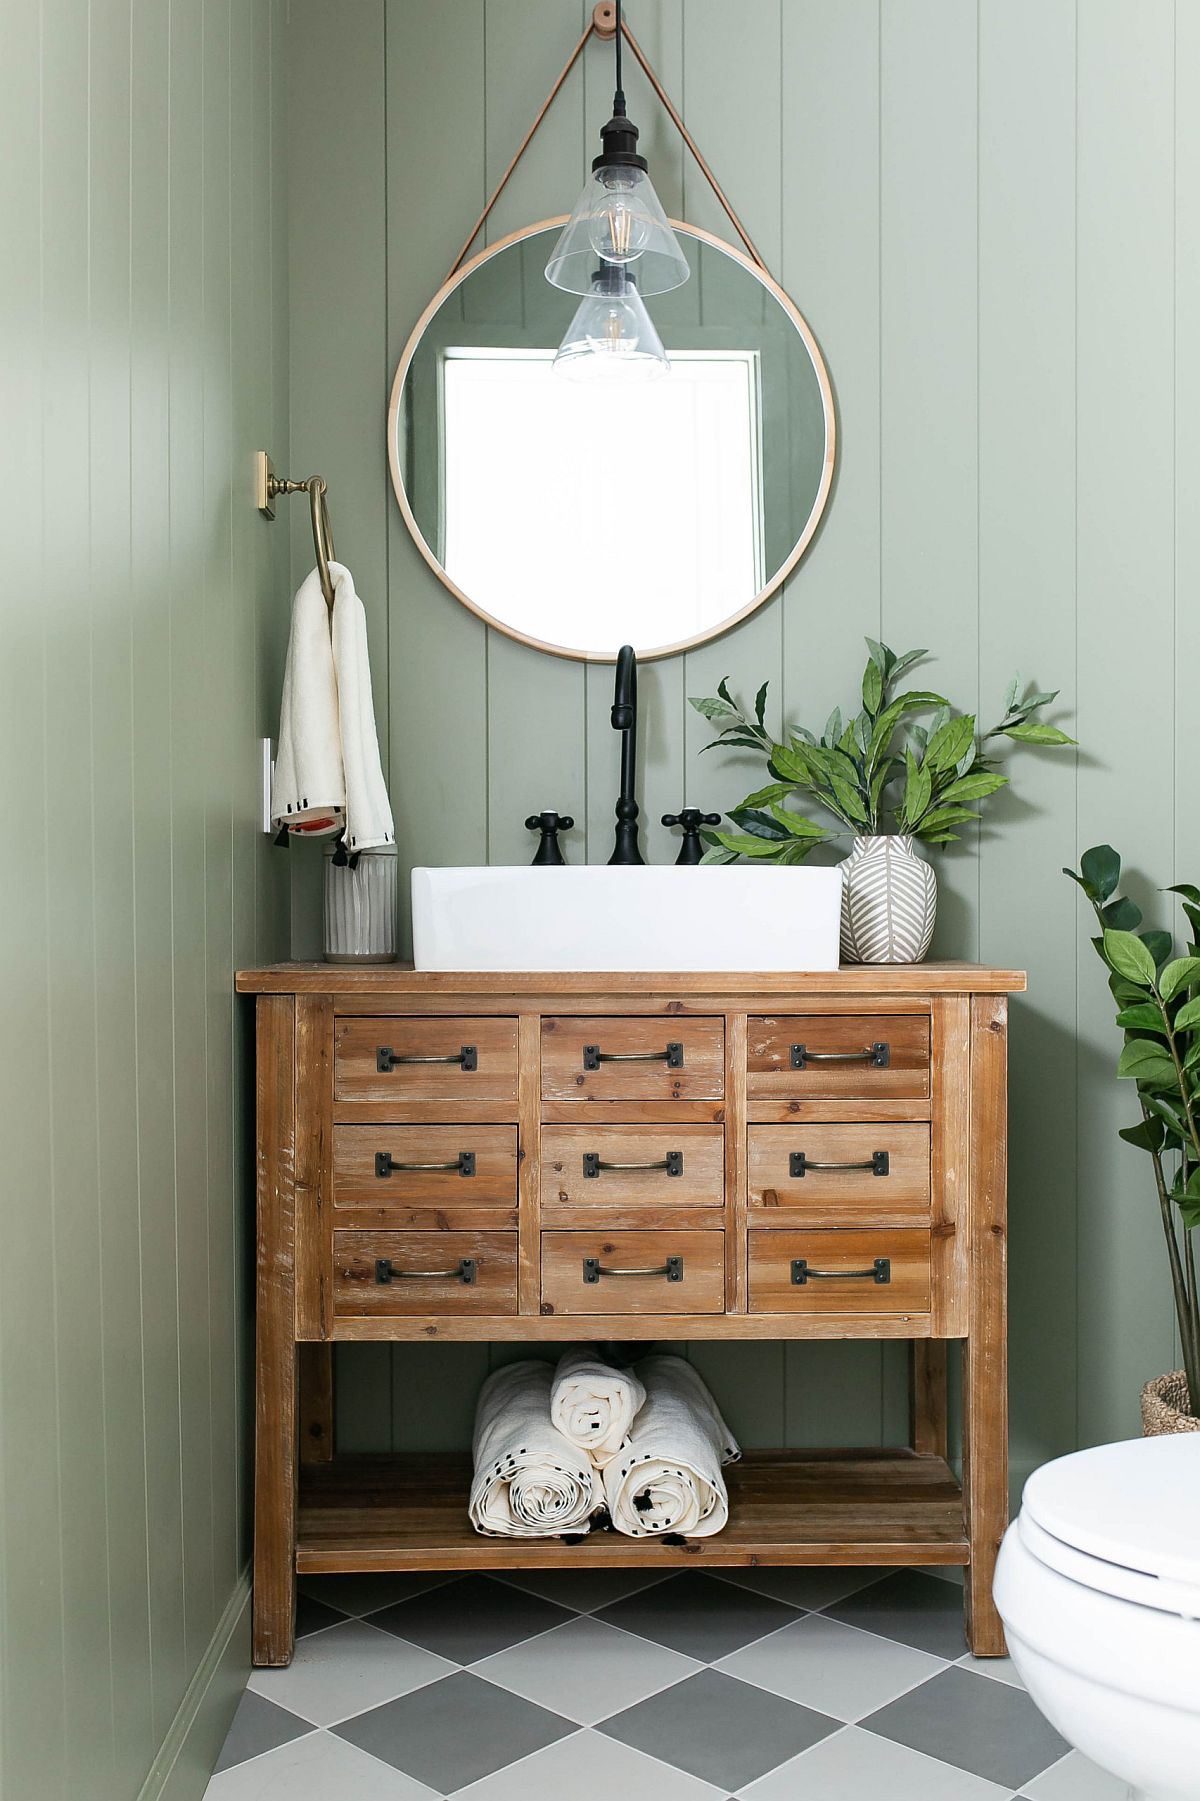 Brilliant blend of pastel blue and wooden vanity in the classy farmhouse vanity